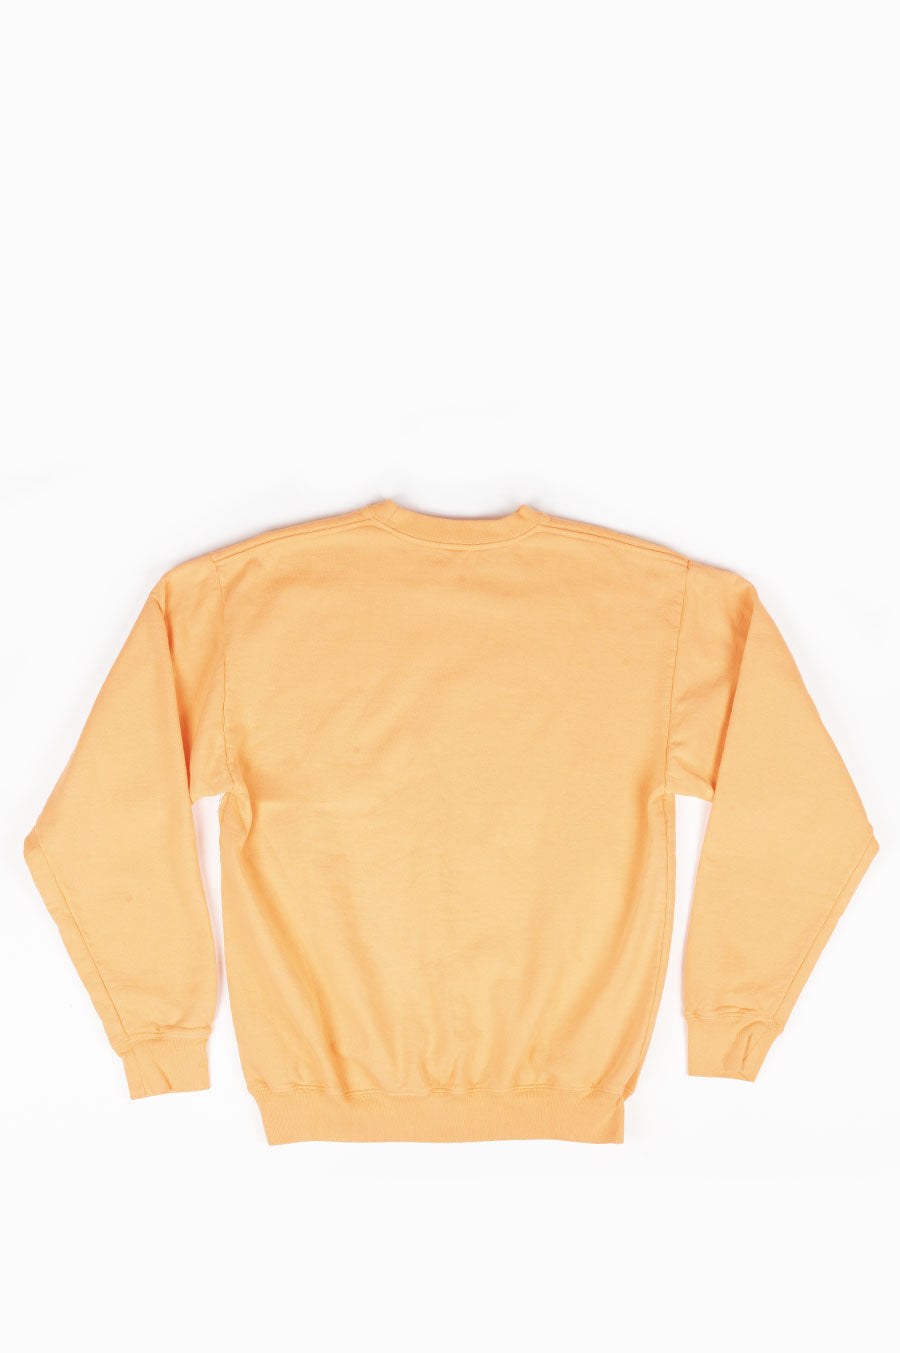 SPORTY AND RICH WELLNESS CREWNECK GUAVA